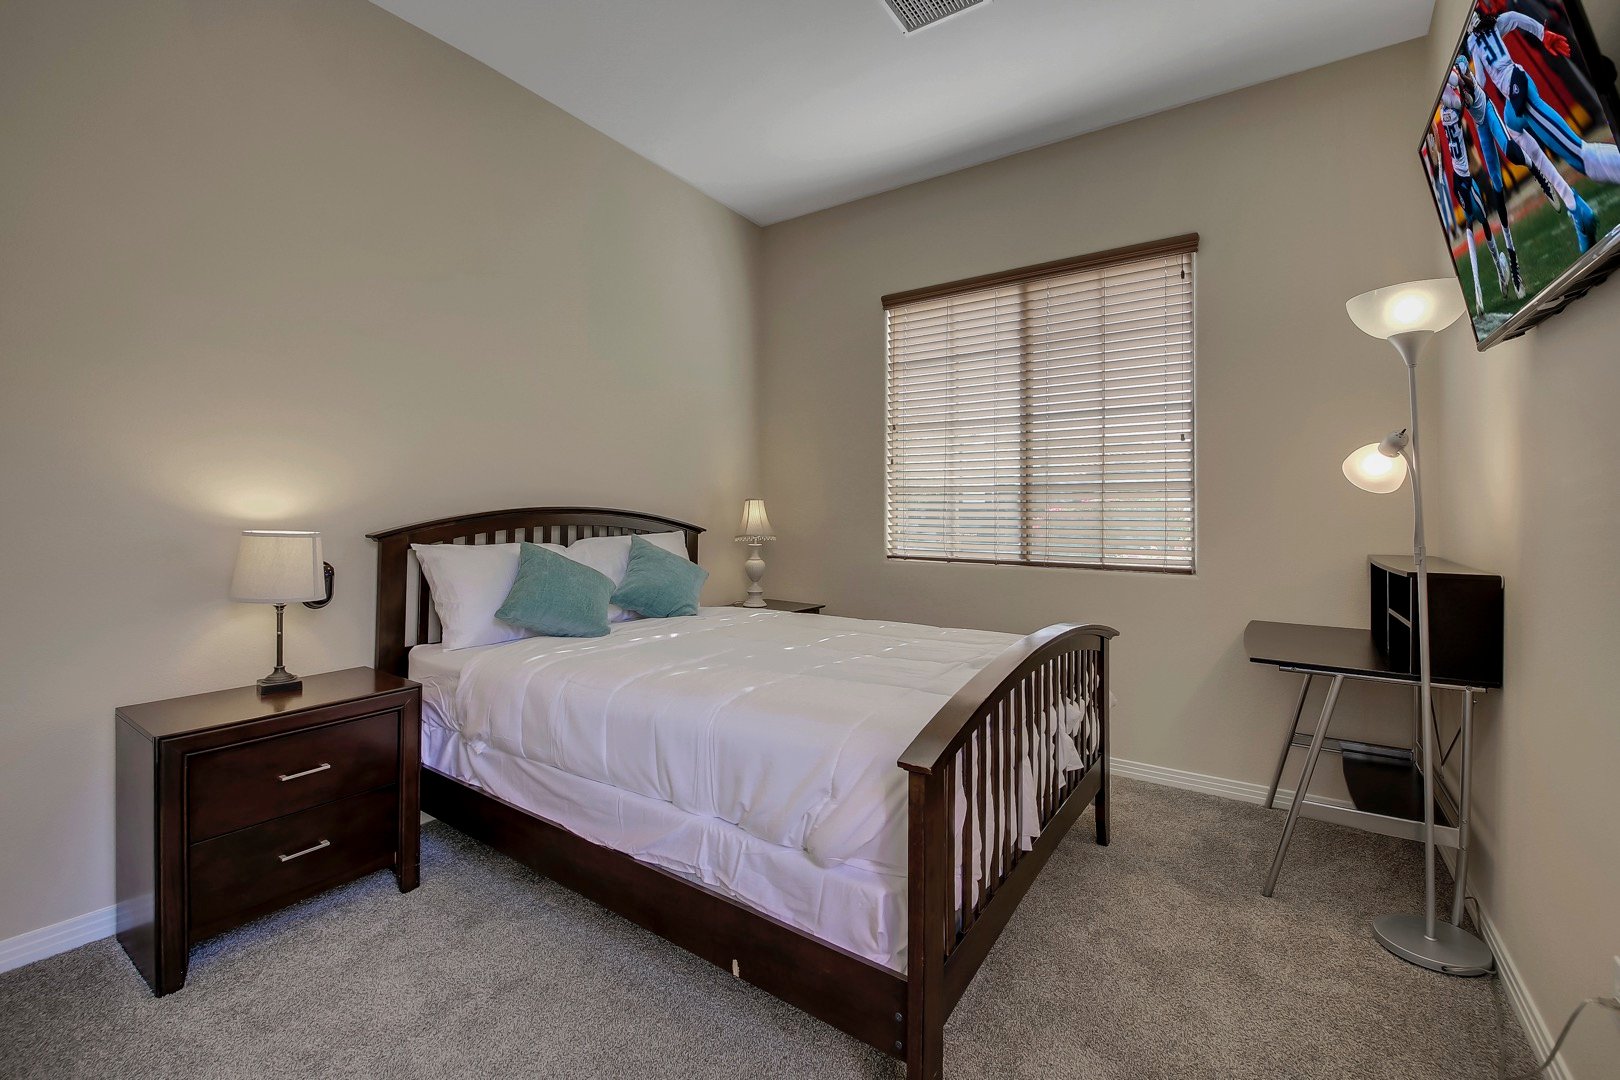 Casita Suite 3 is located in the courtyard and features a  Queen-sized Bed, 42-inch TCL by Roku Smart television with private, en suite bathroom .